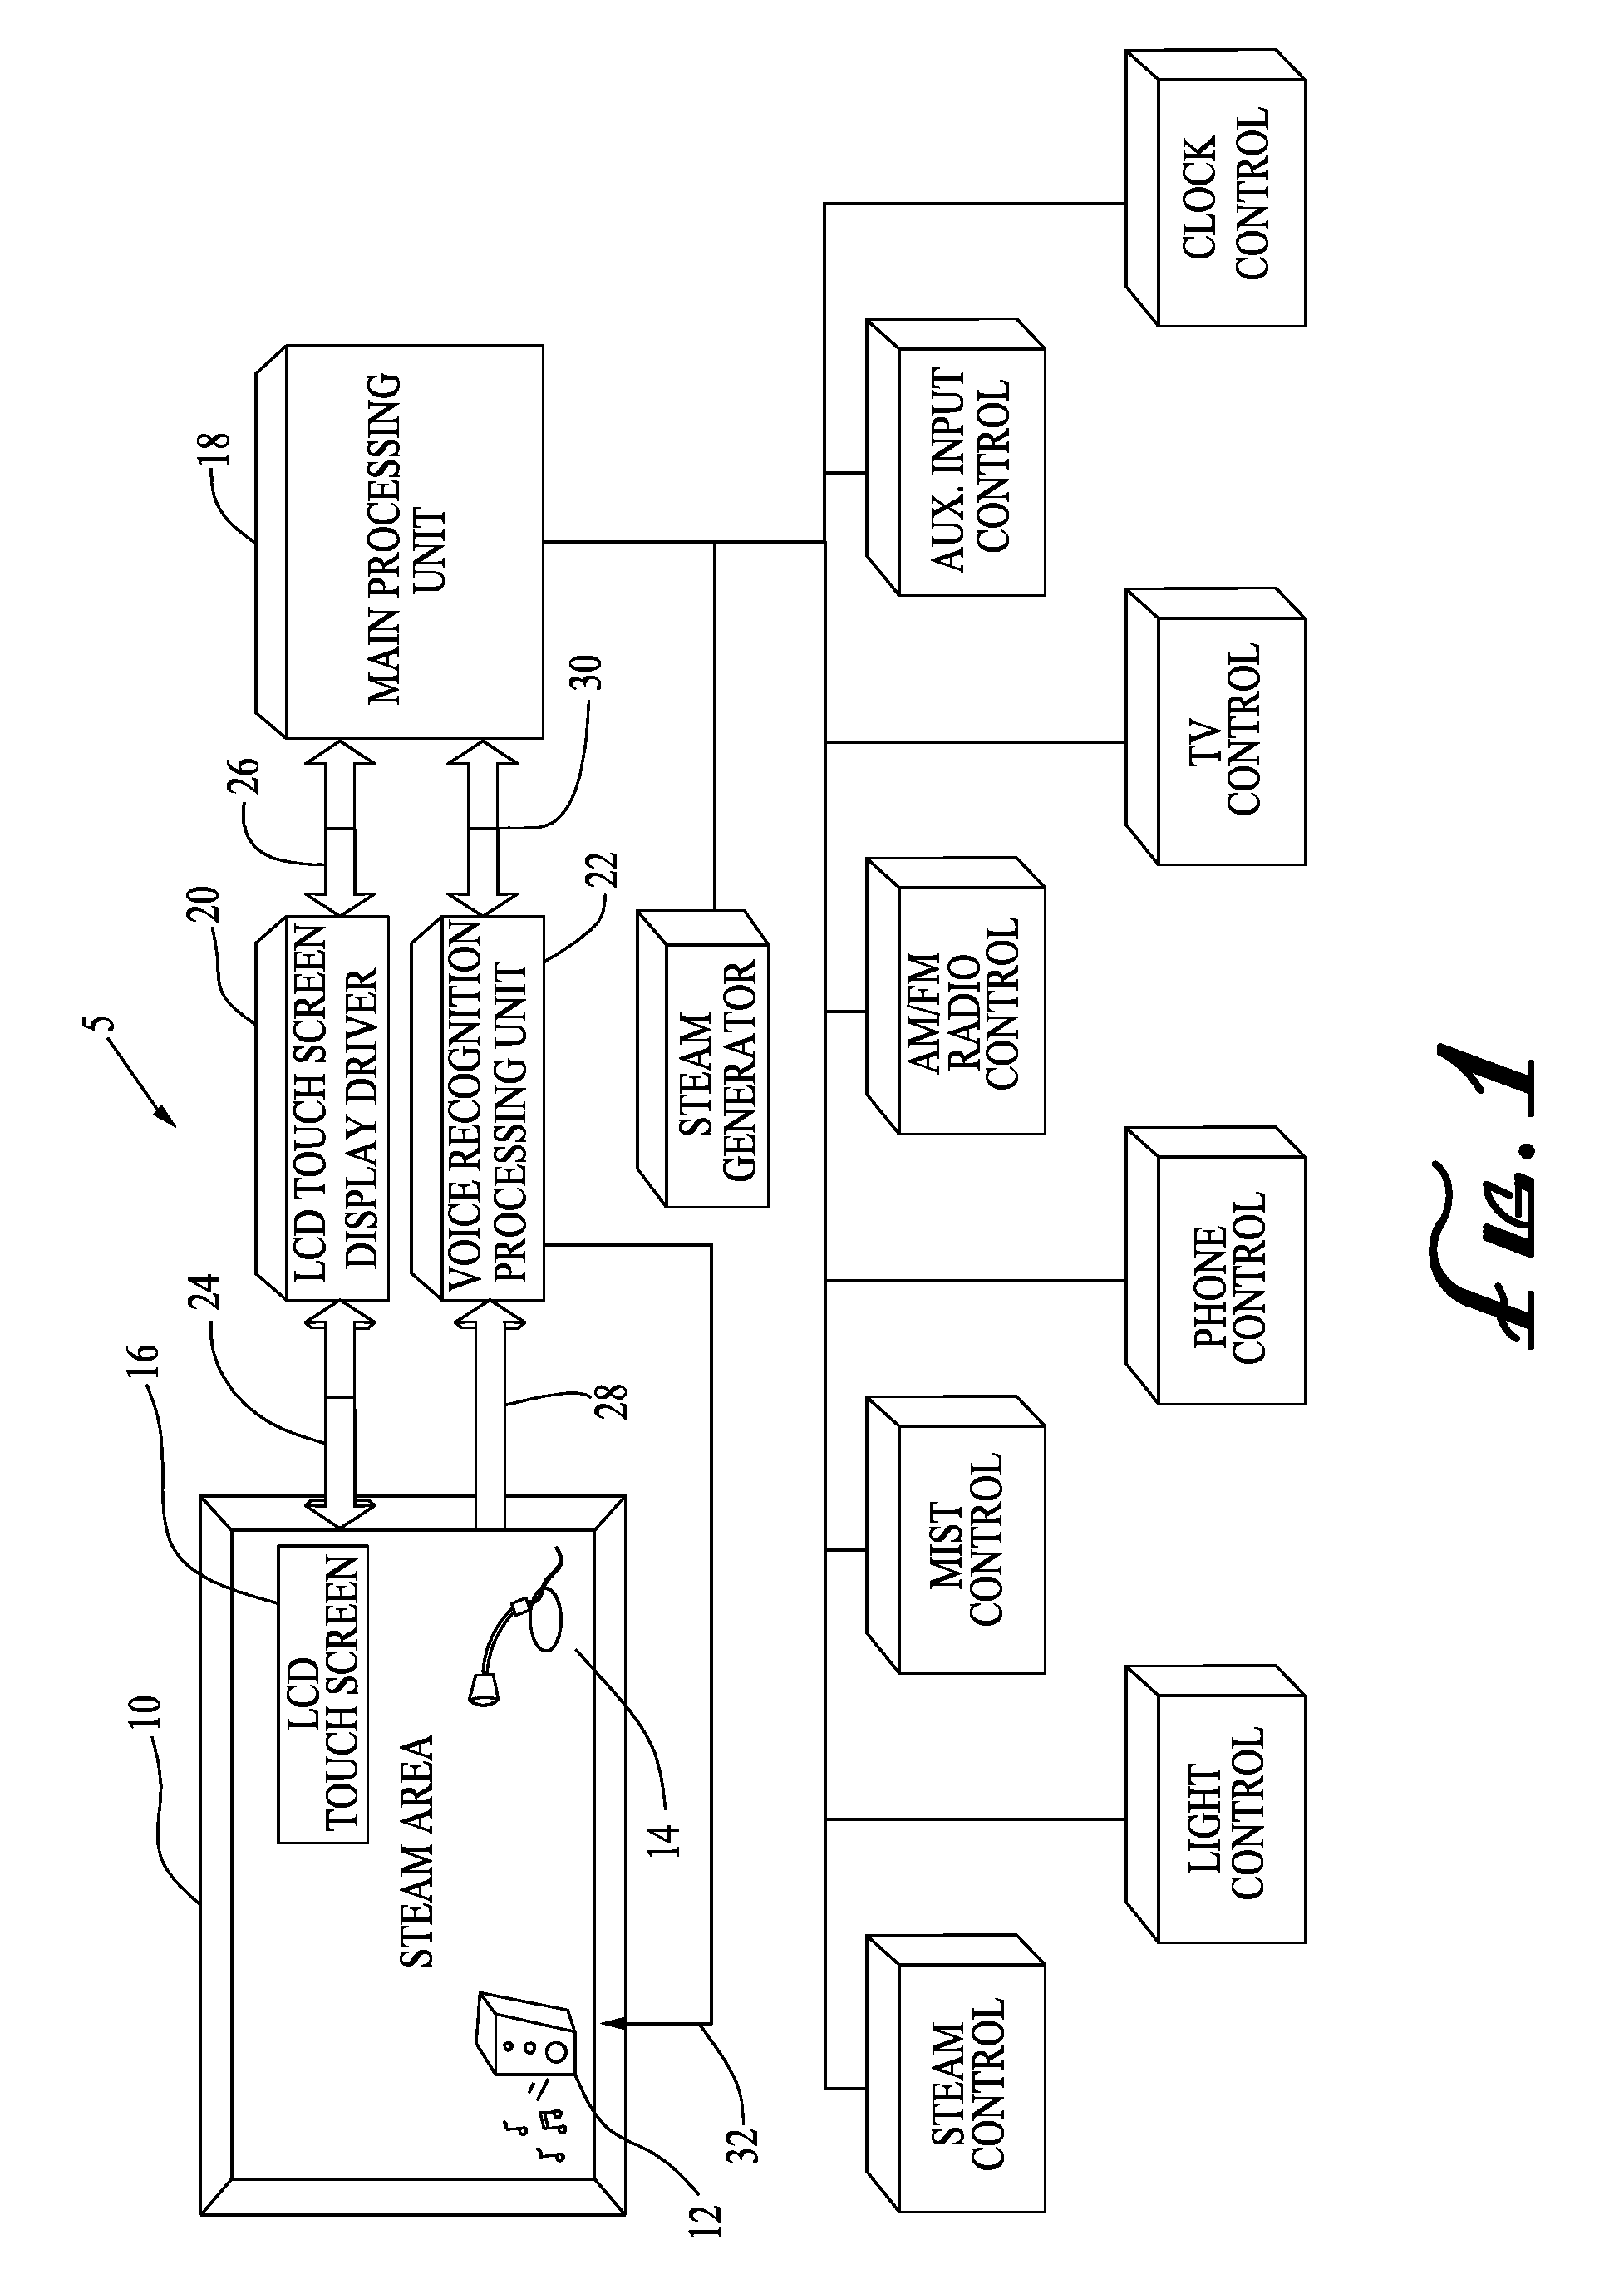 System And Method For Controlling The Environment Of A Steambath